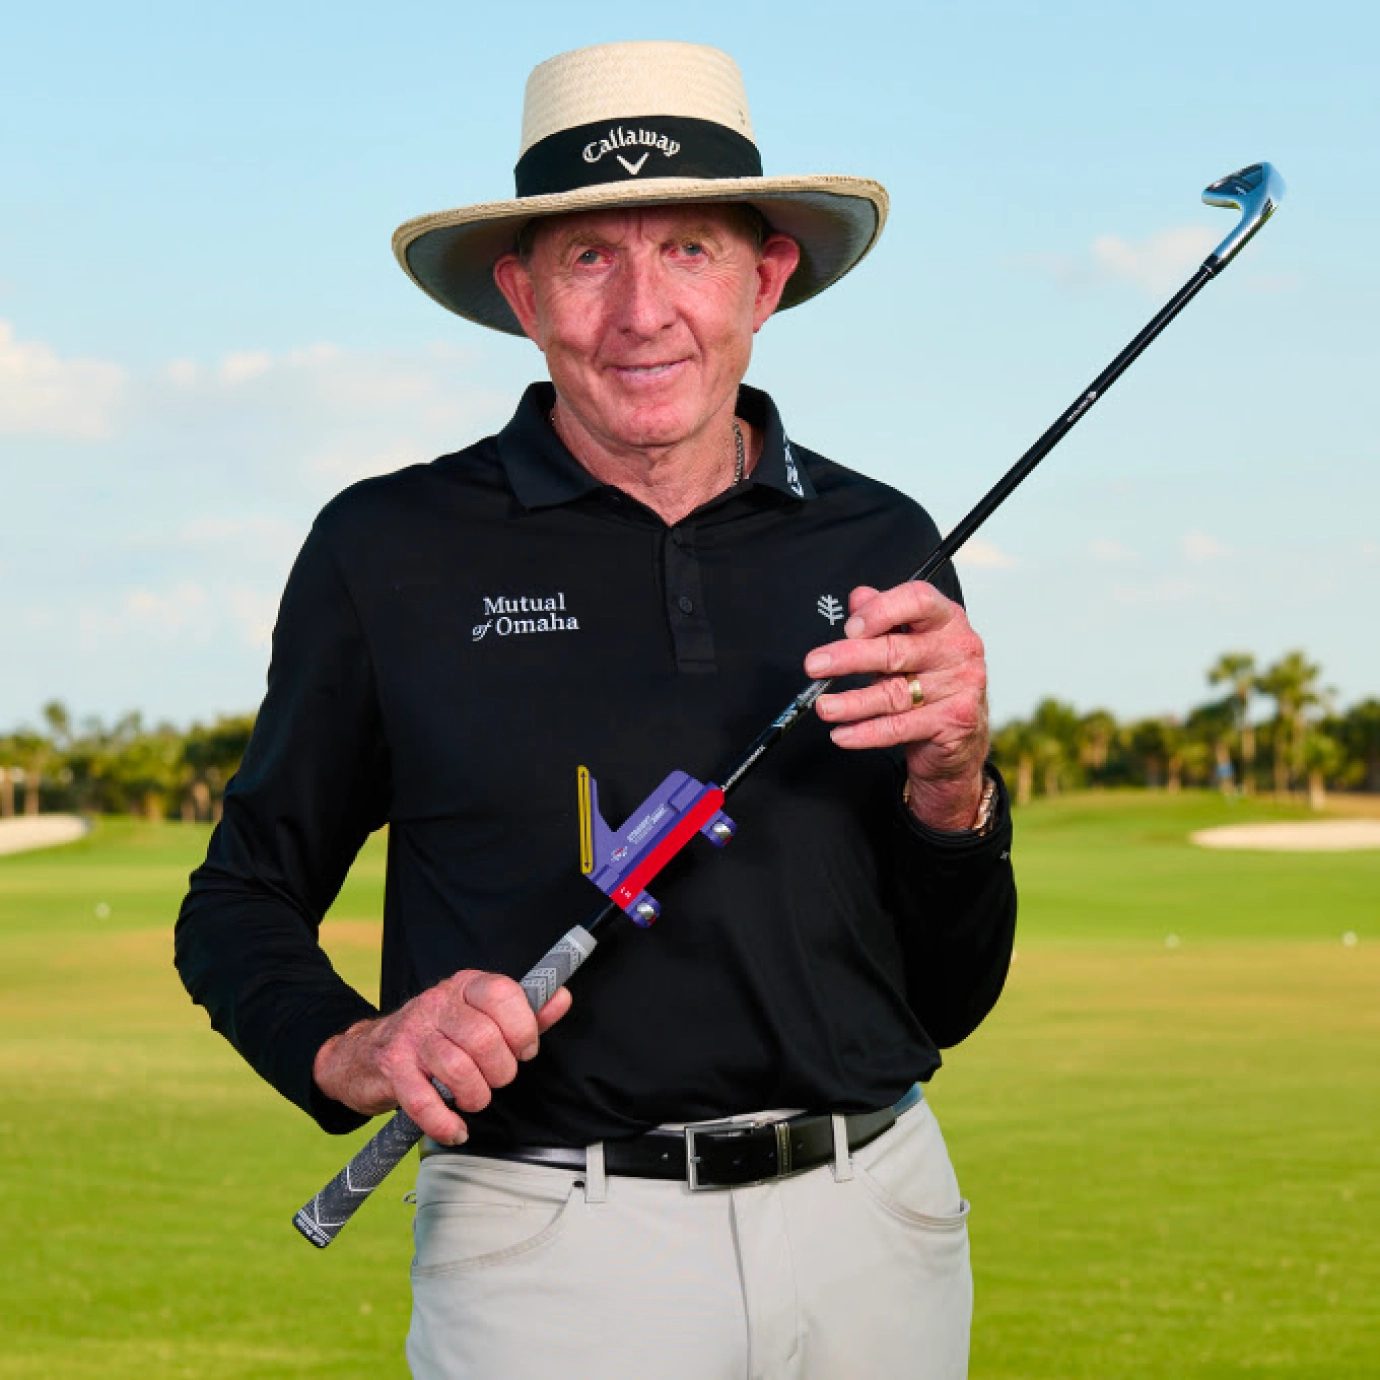 David Leadbetter holding the StraightAway attached to a club